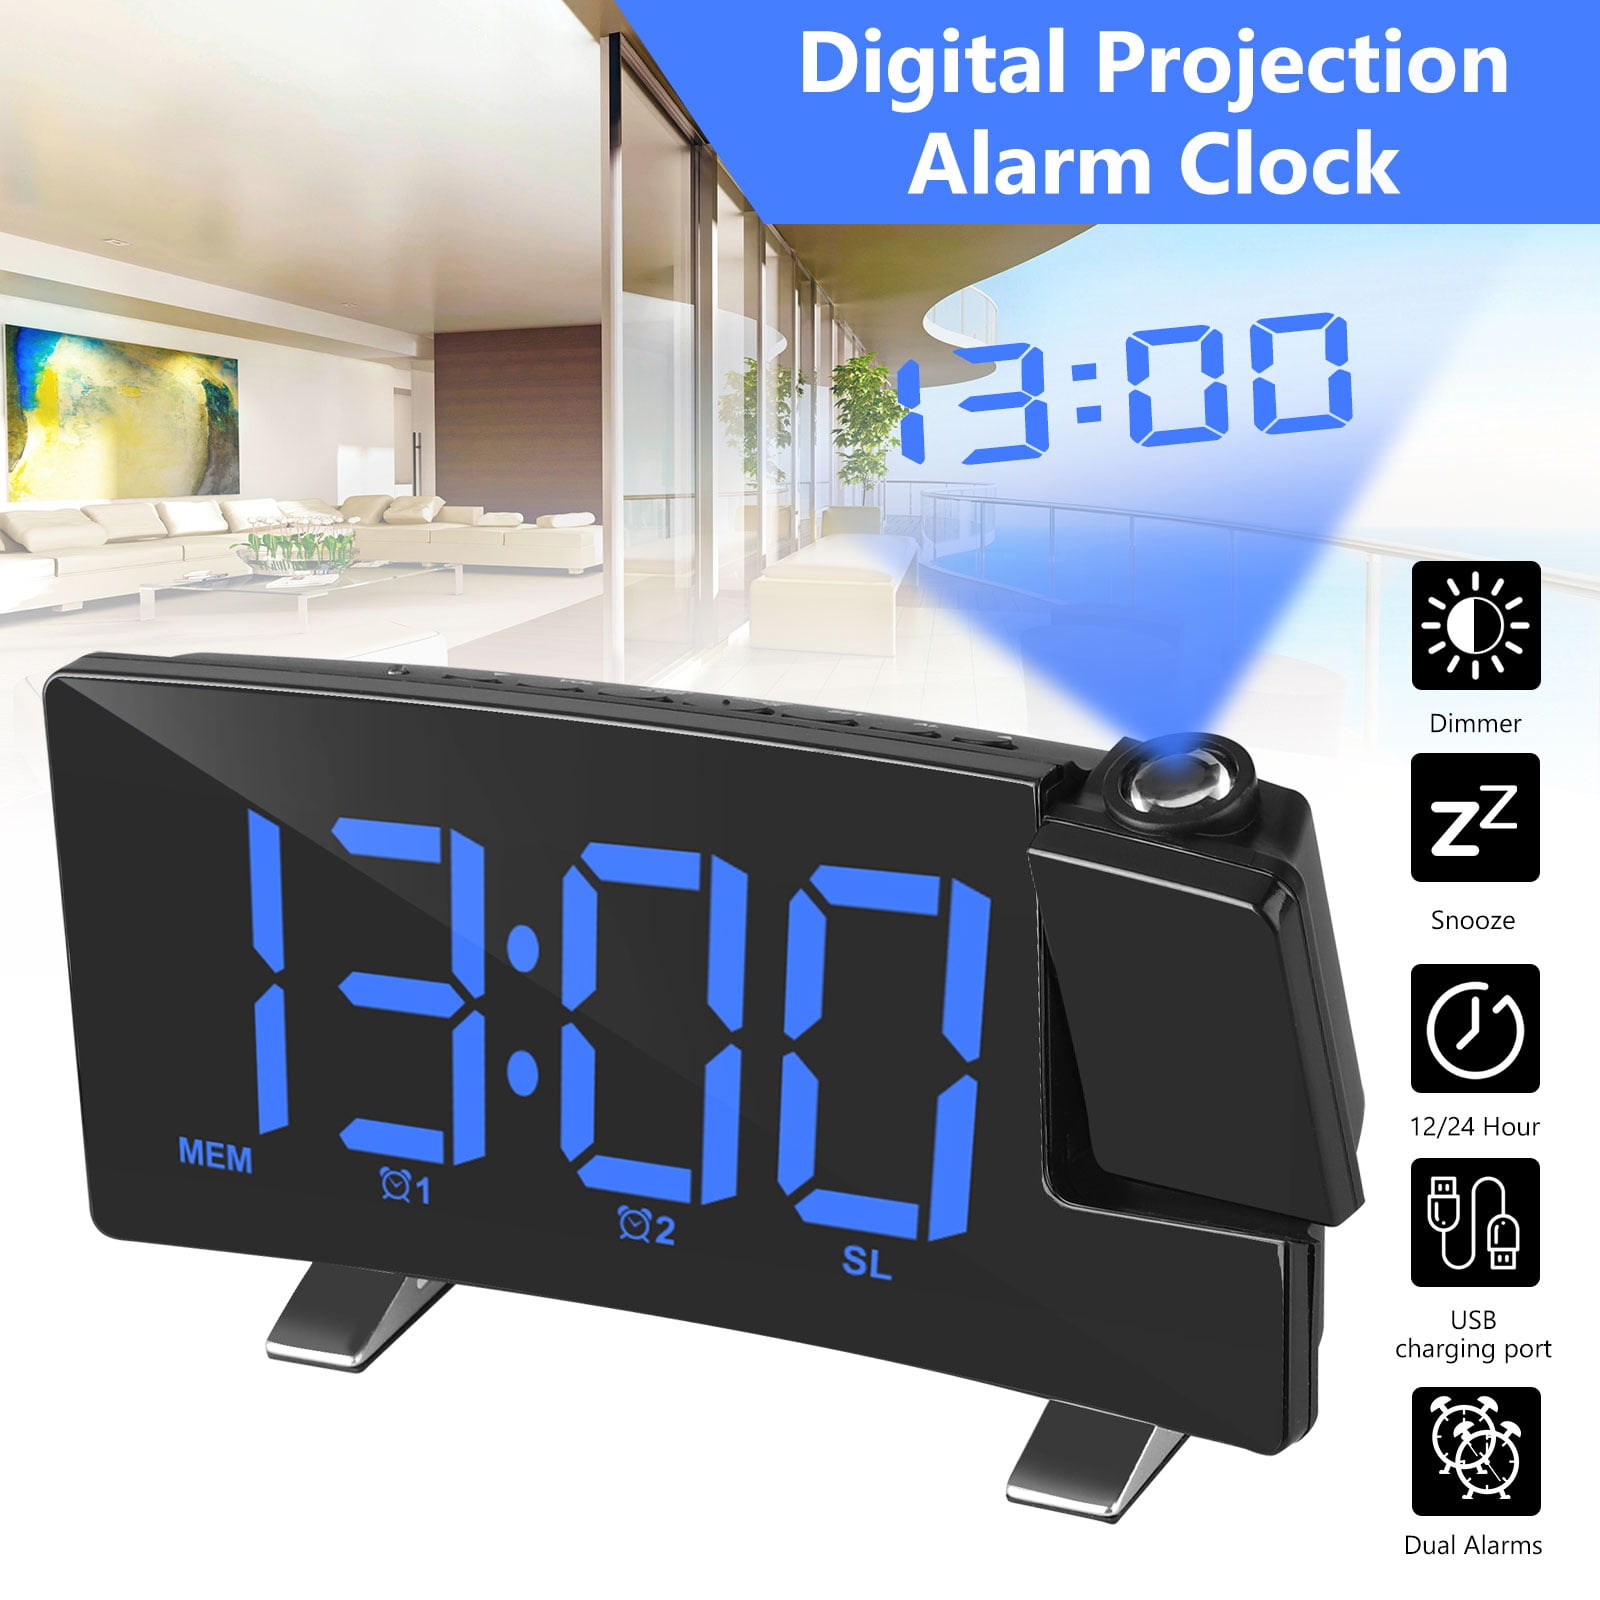 USB Charger Super Loud Dual Alarm Clock for Heavy Sleepers Adult Alarm Clock with Projection on Ceiling Projection Digital Alarm Clock with FM Radio 6 Large LED Screen Alarm Clock Battery Backup 